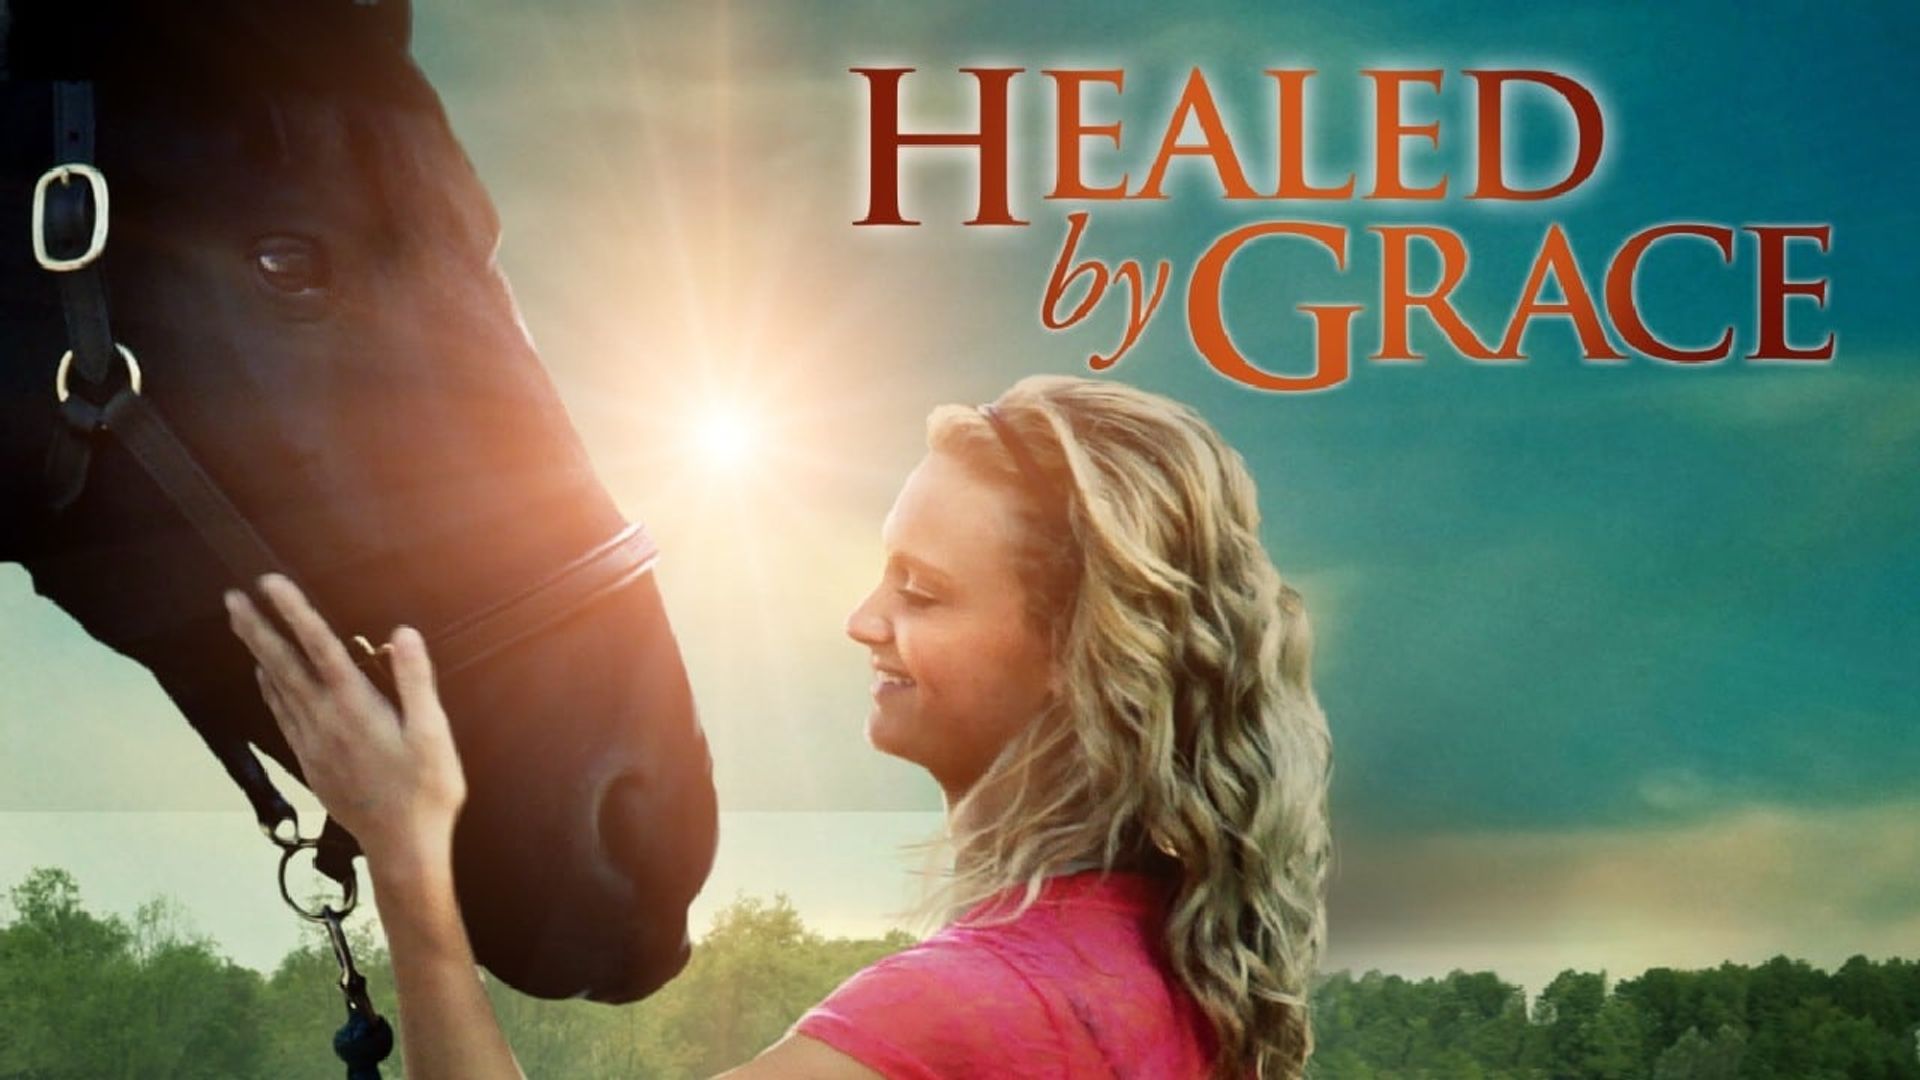 Healed by Grace background